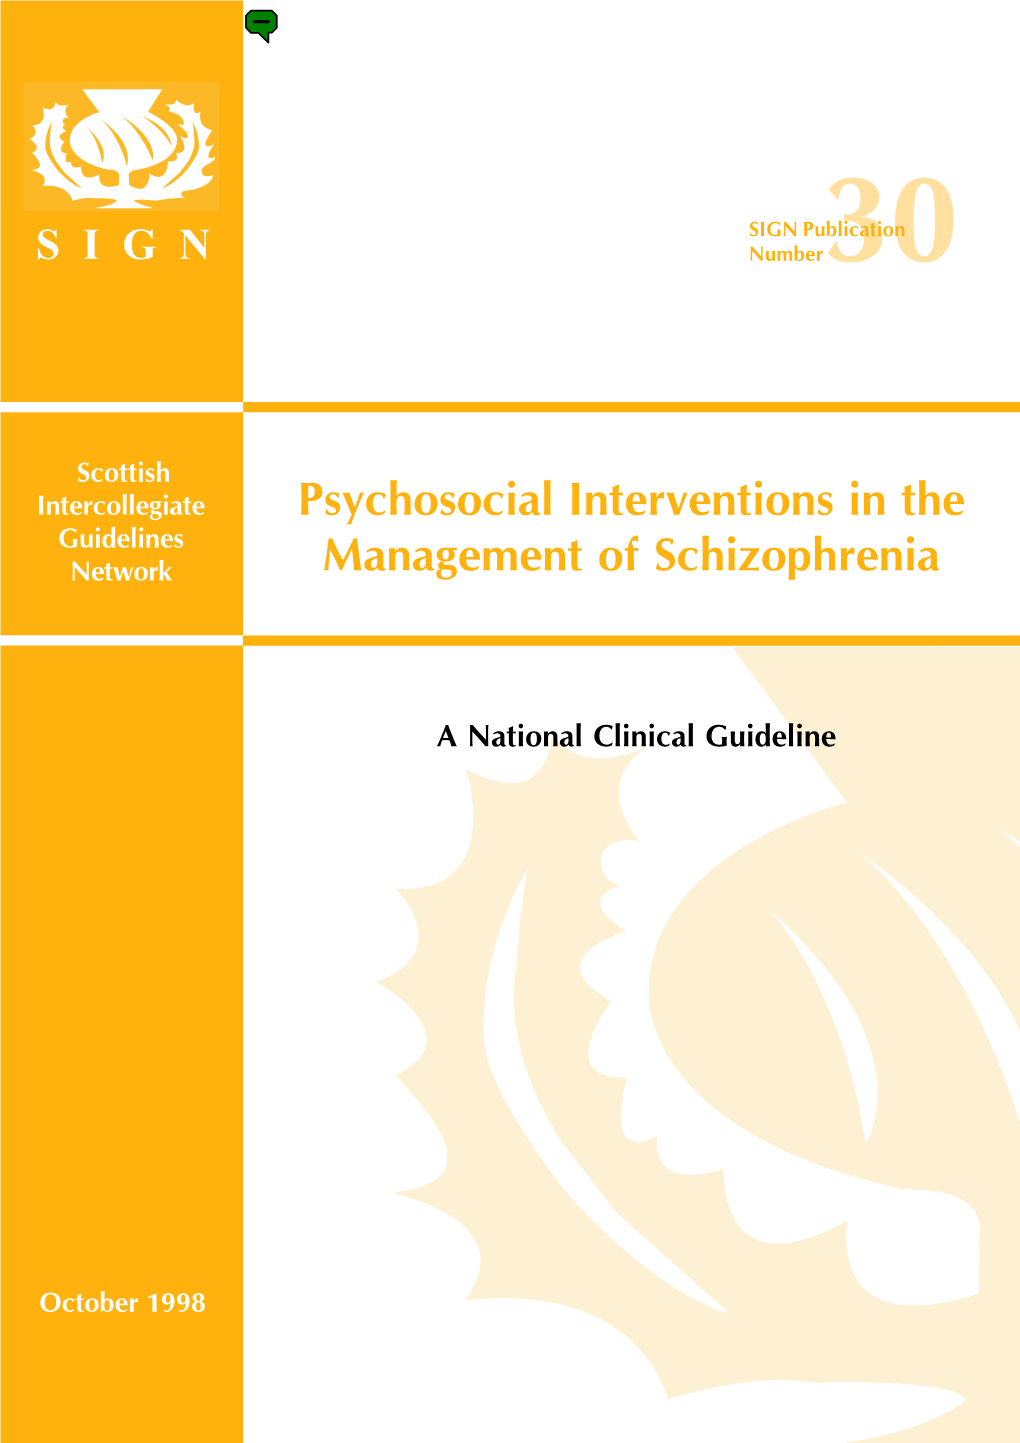 Psychosocial Interventions in the Management of Schizophrenia